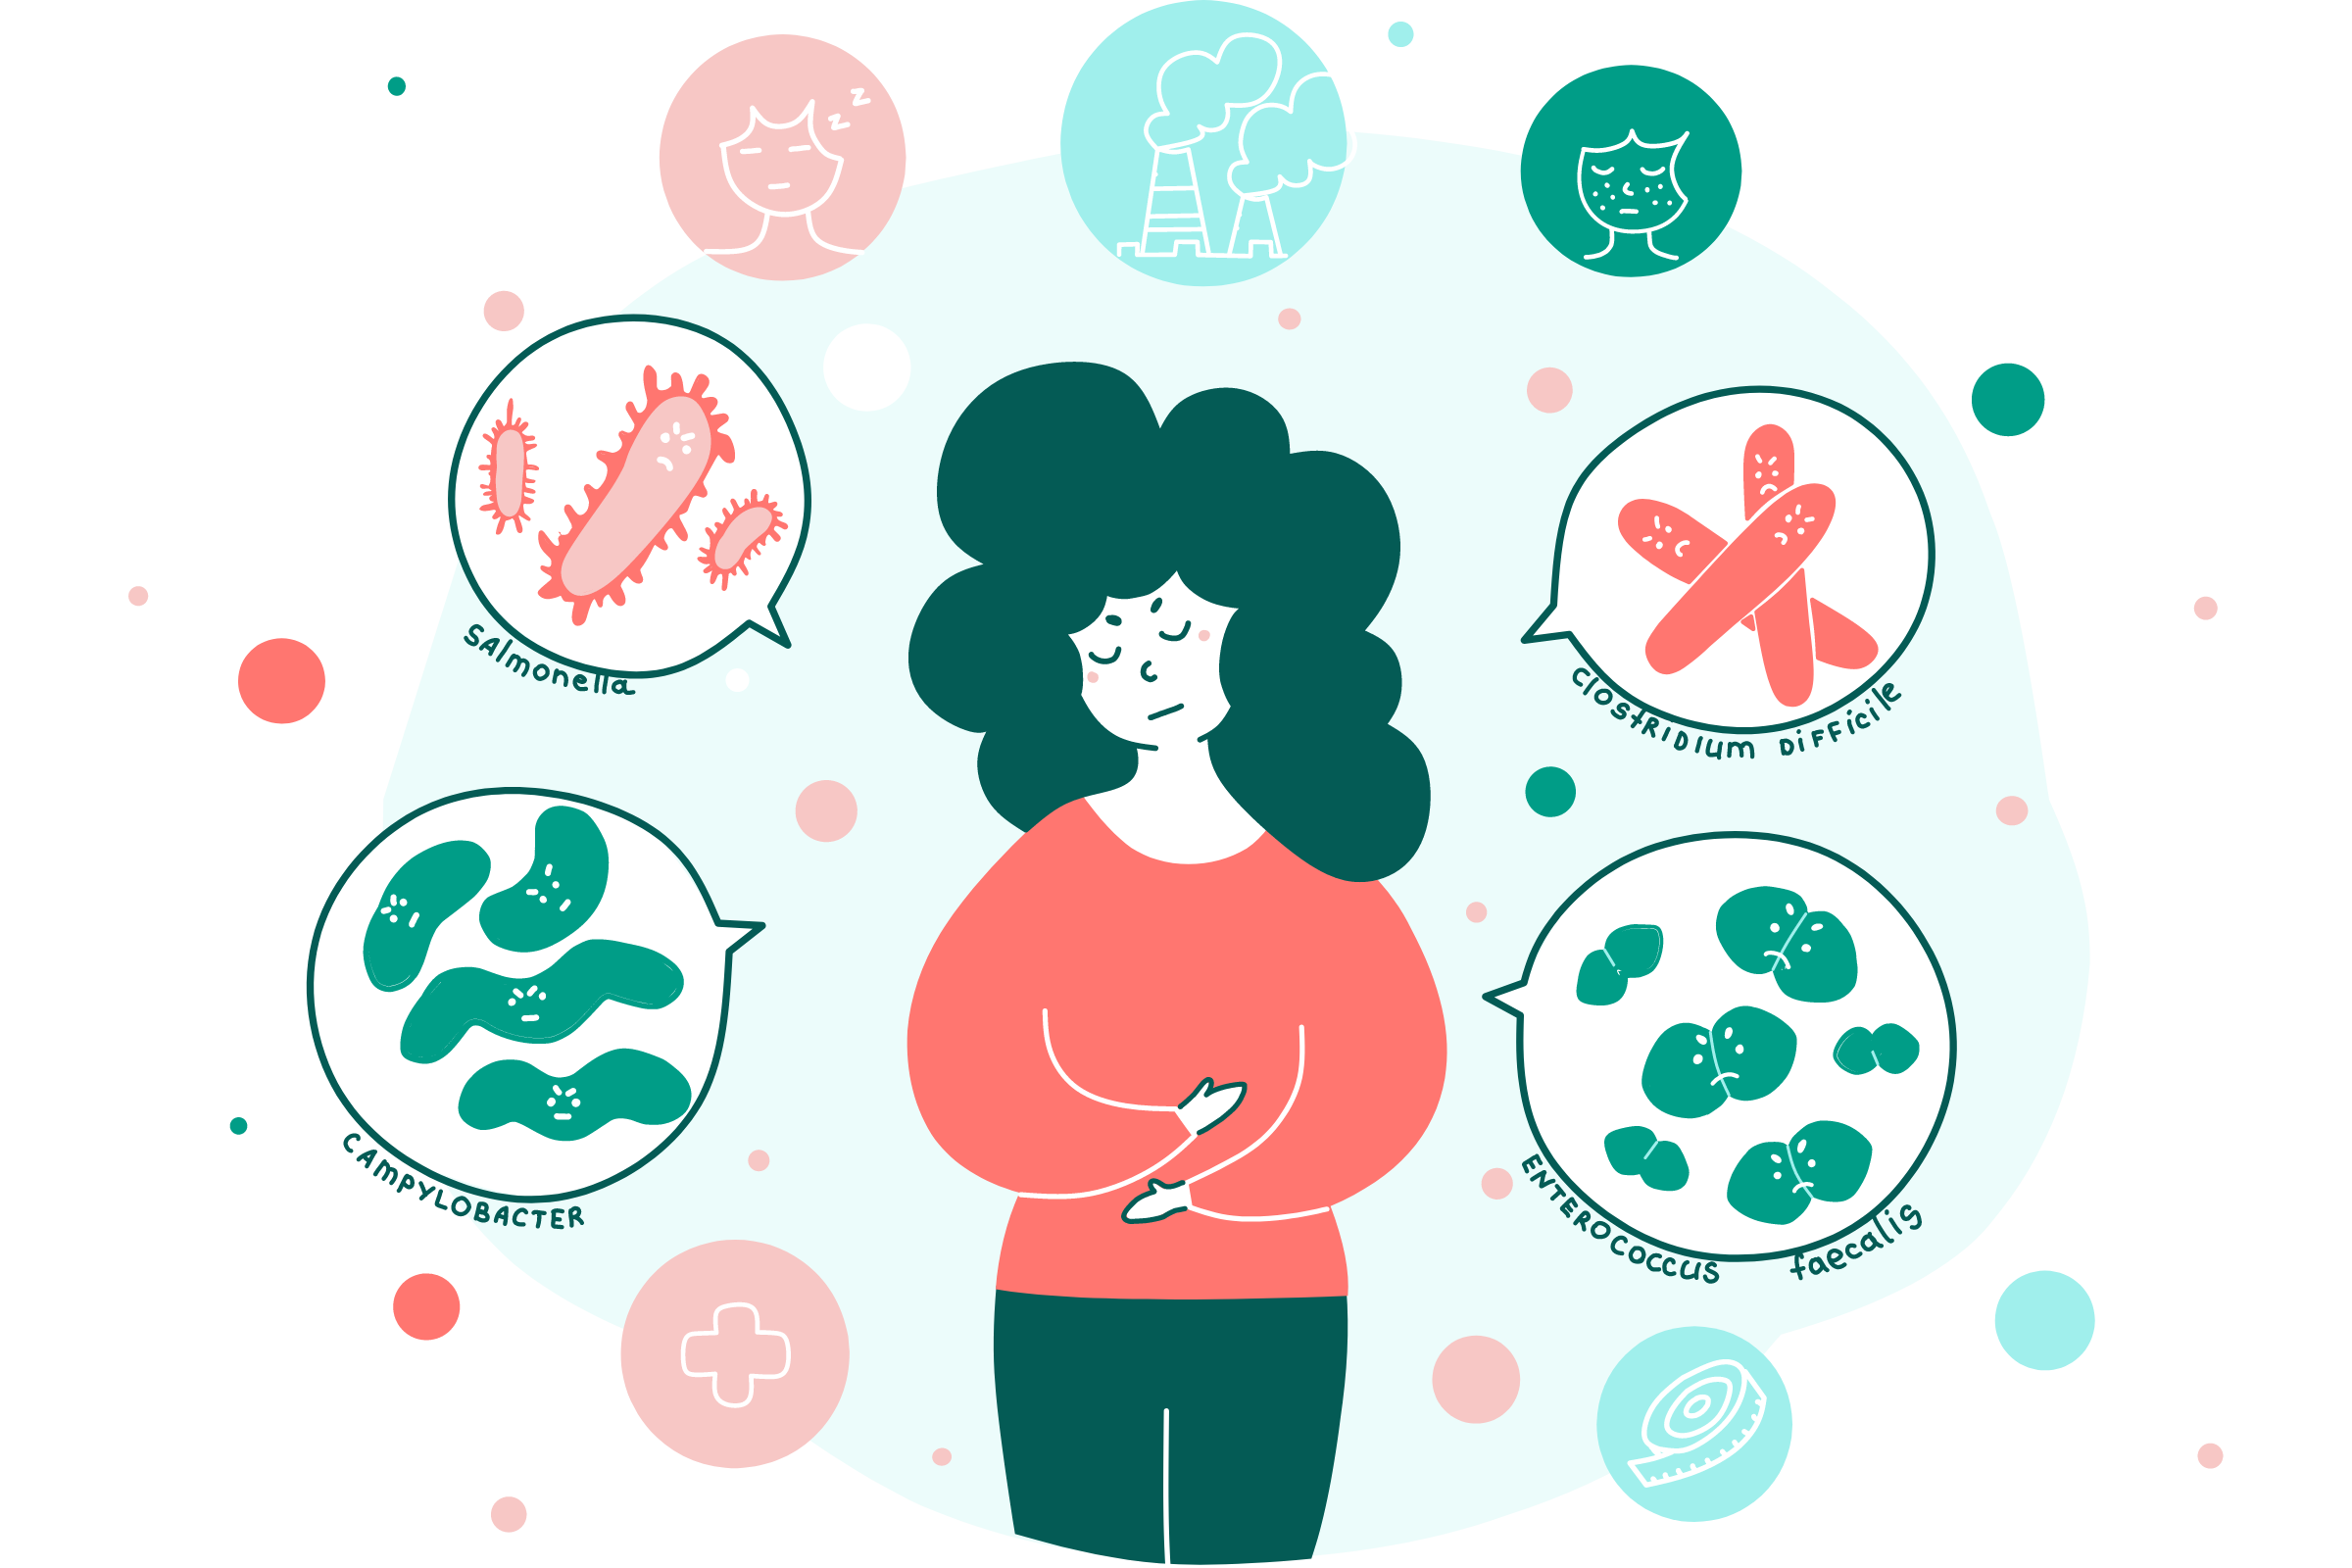 Gut health and rosacea is affected by bad bacteria including: Campylobacter, Enterococcus Faecalis, and Clostridium Difficile which  are often associated with leaky gut, disease, and infection.